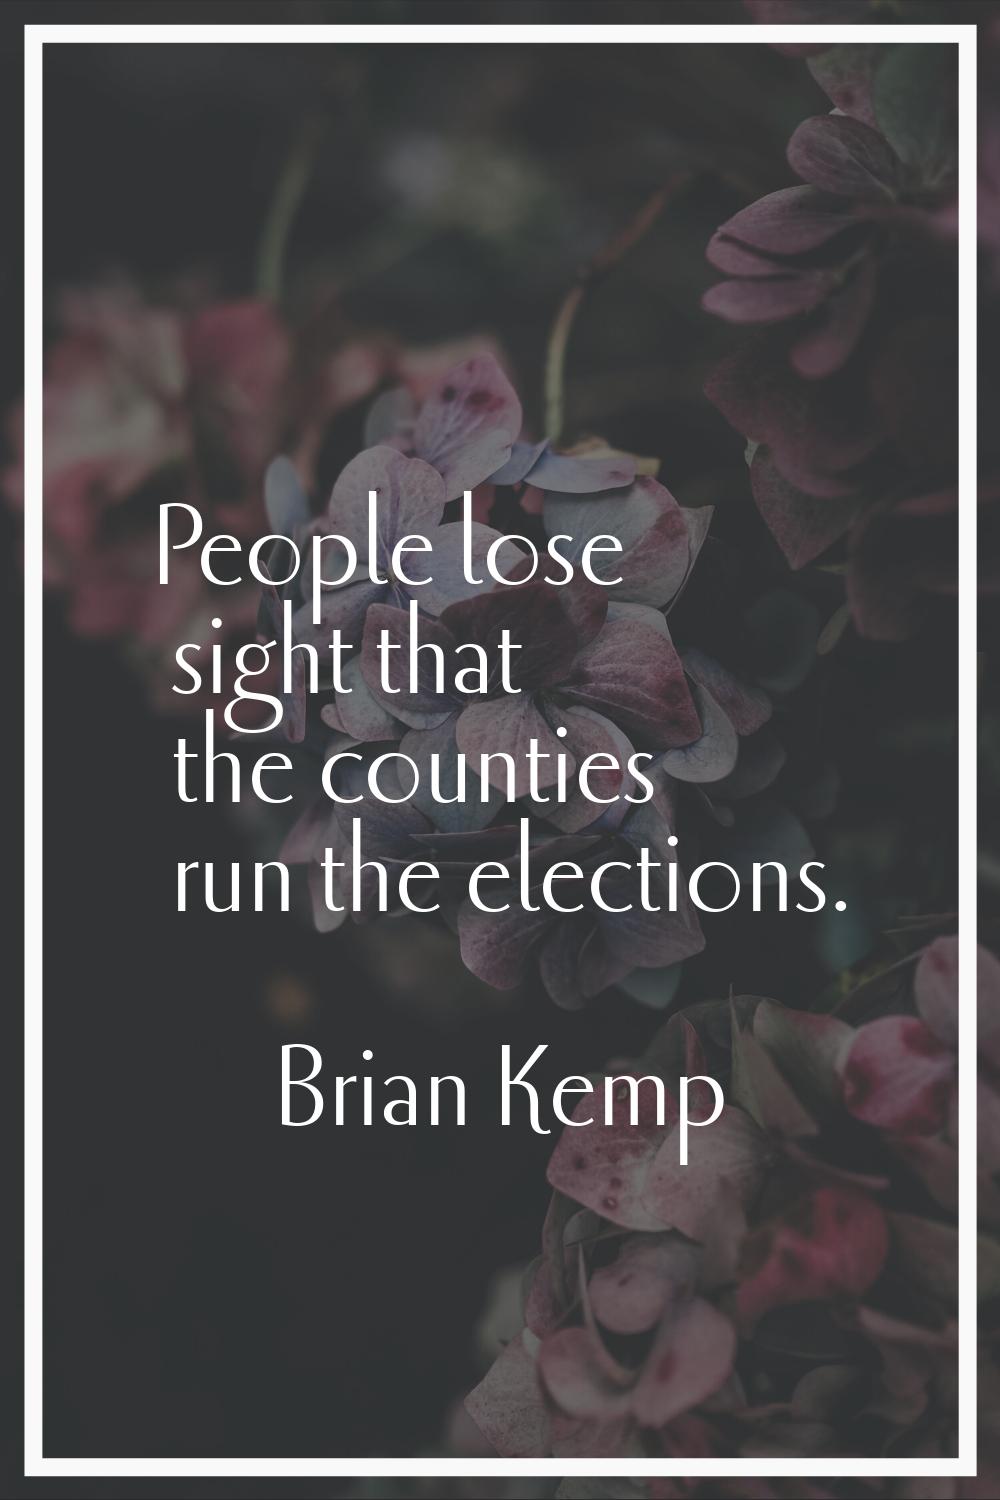 People lose sight that the counties run the elections.